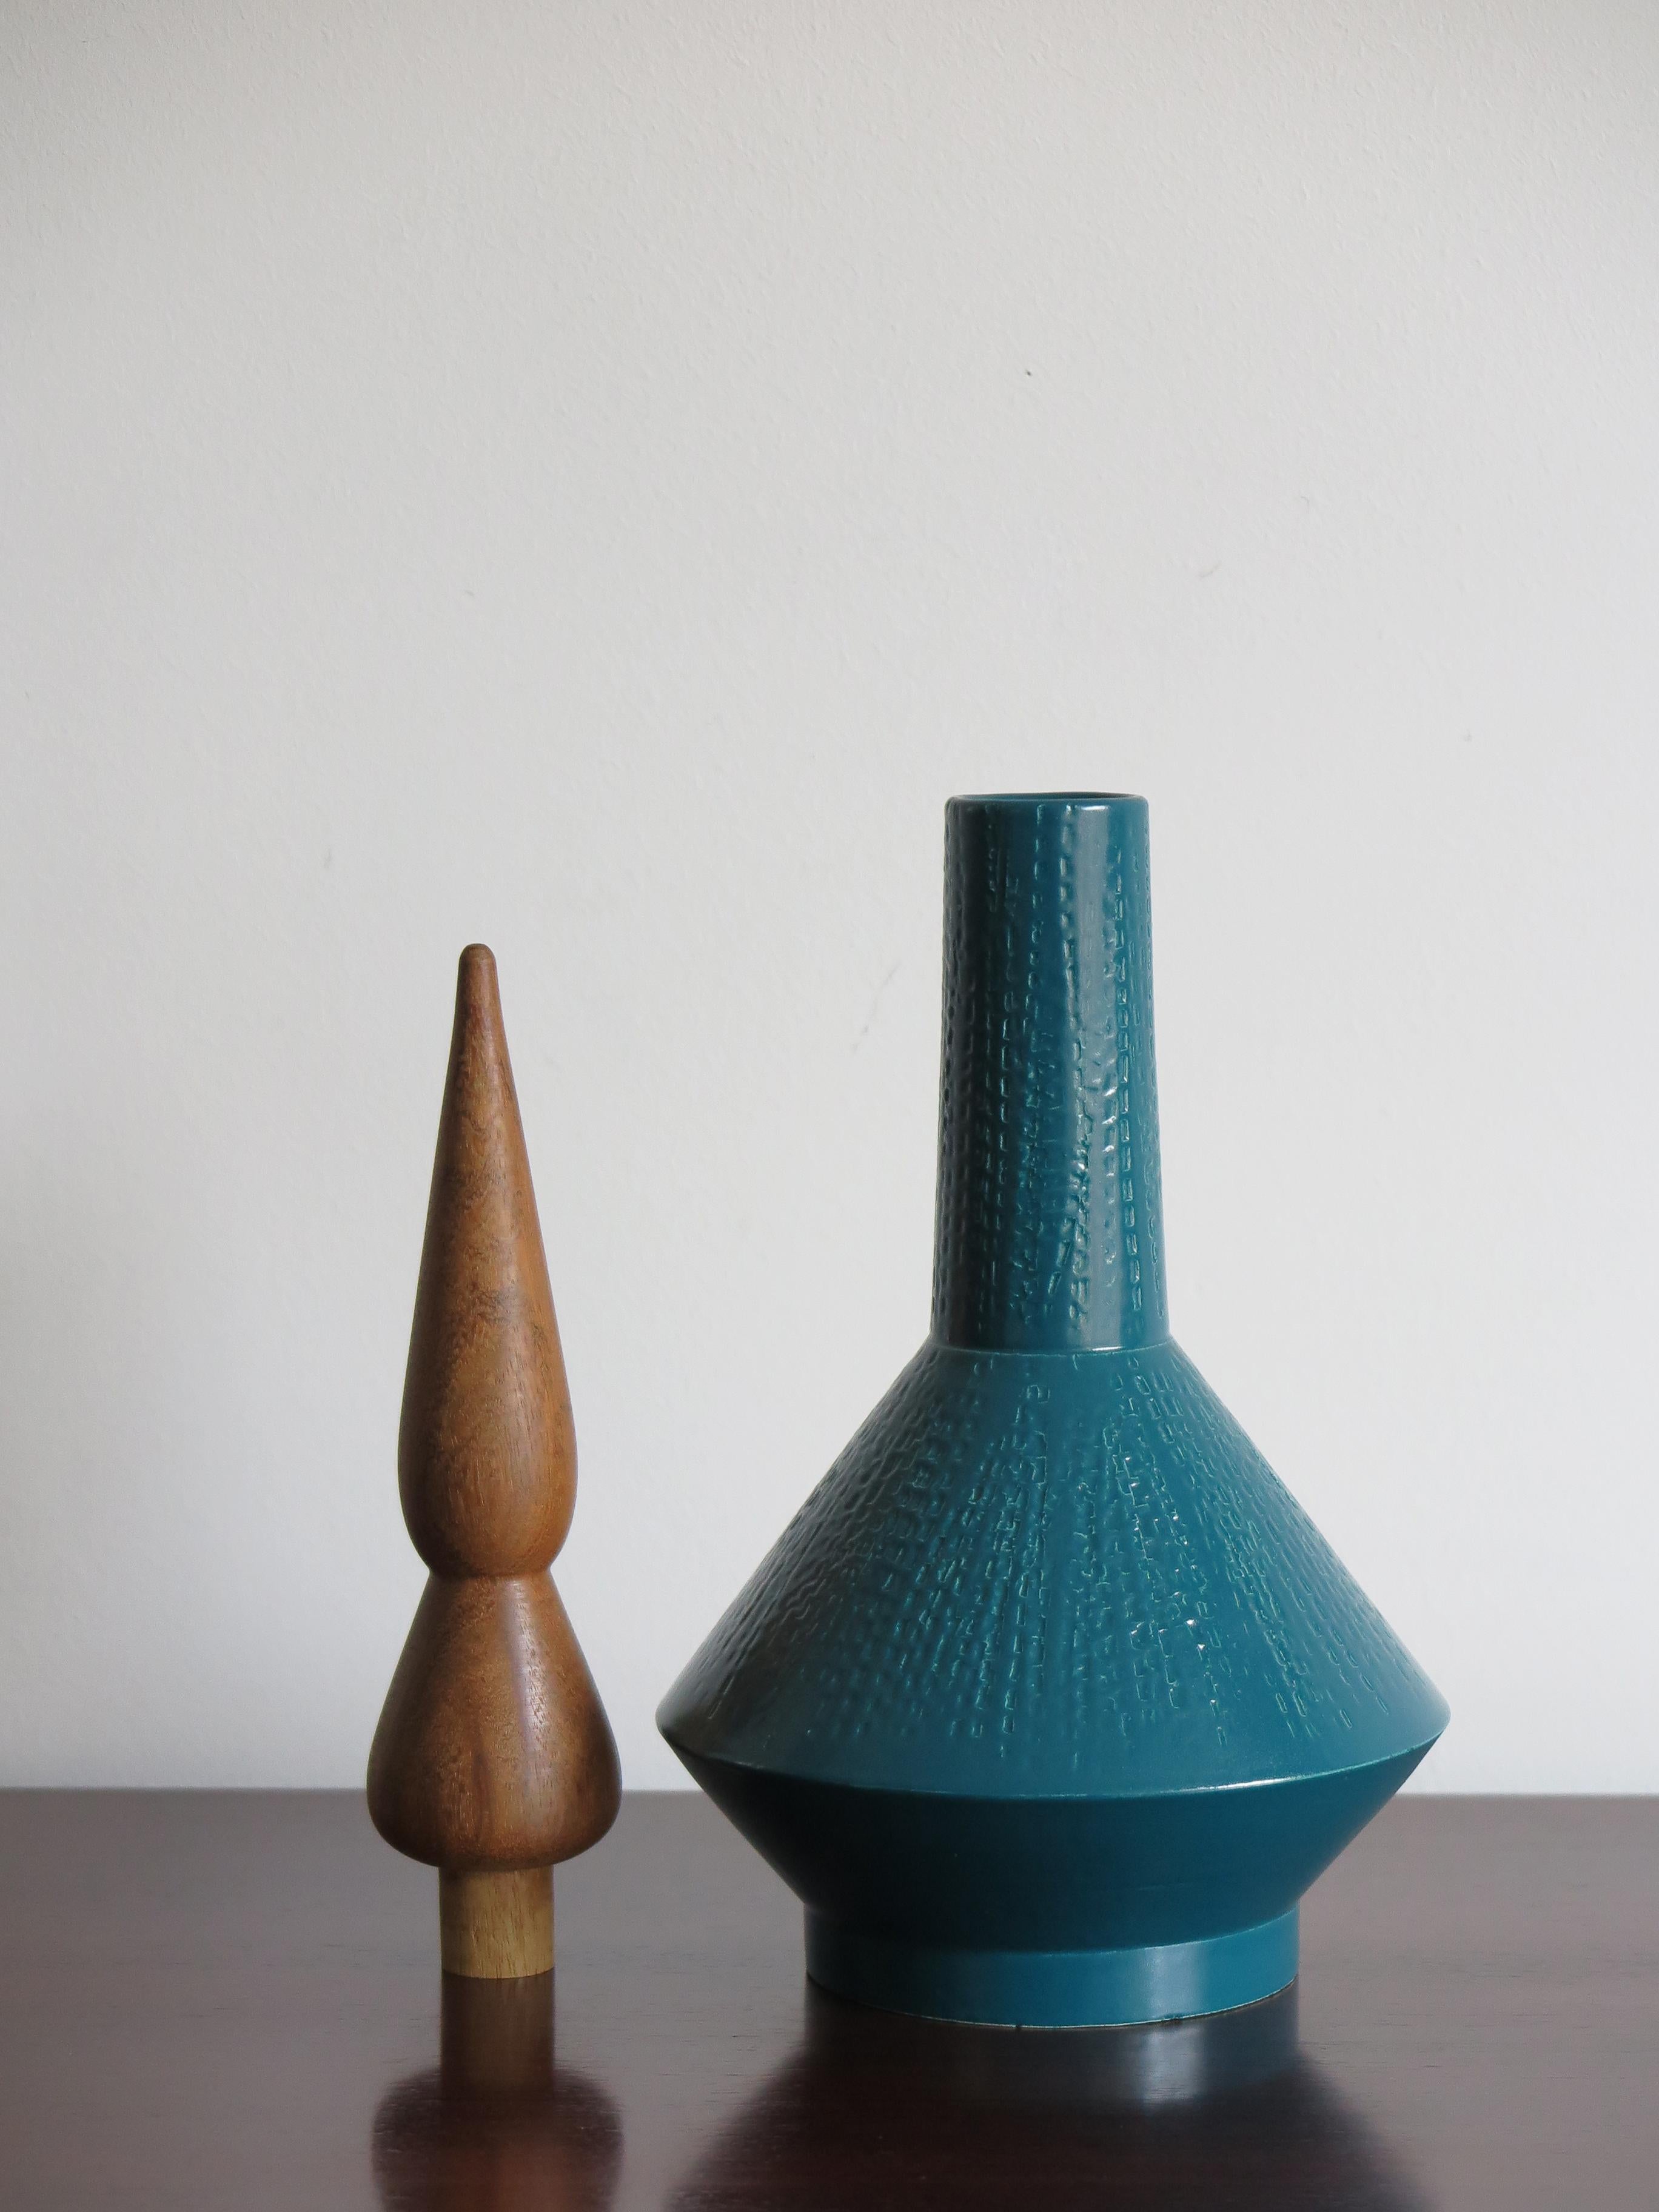 Contemporary Blue Green Ceramic Vases Designed by Capperidicasa, Made in Italy 4